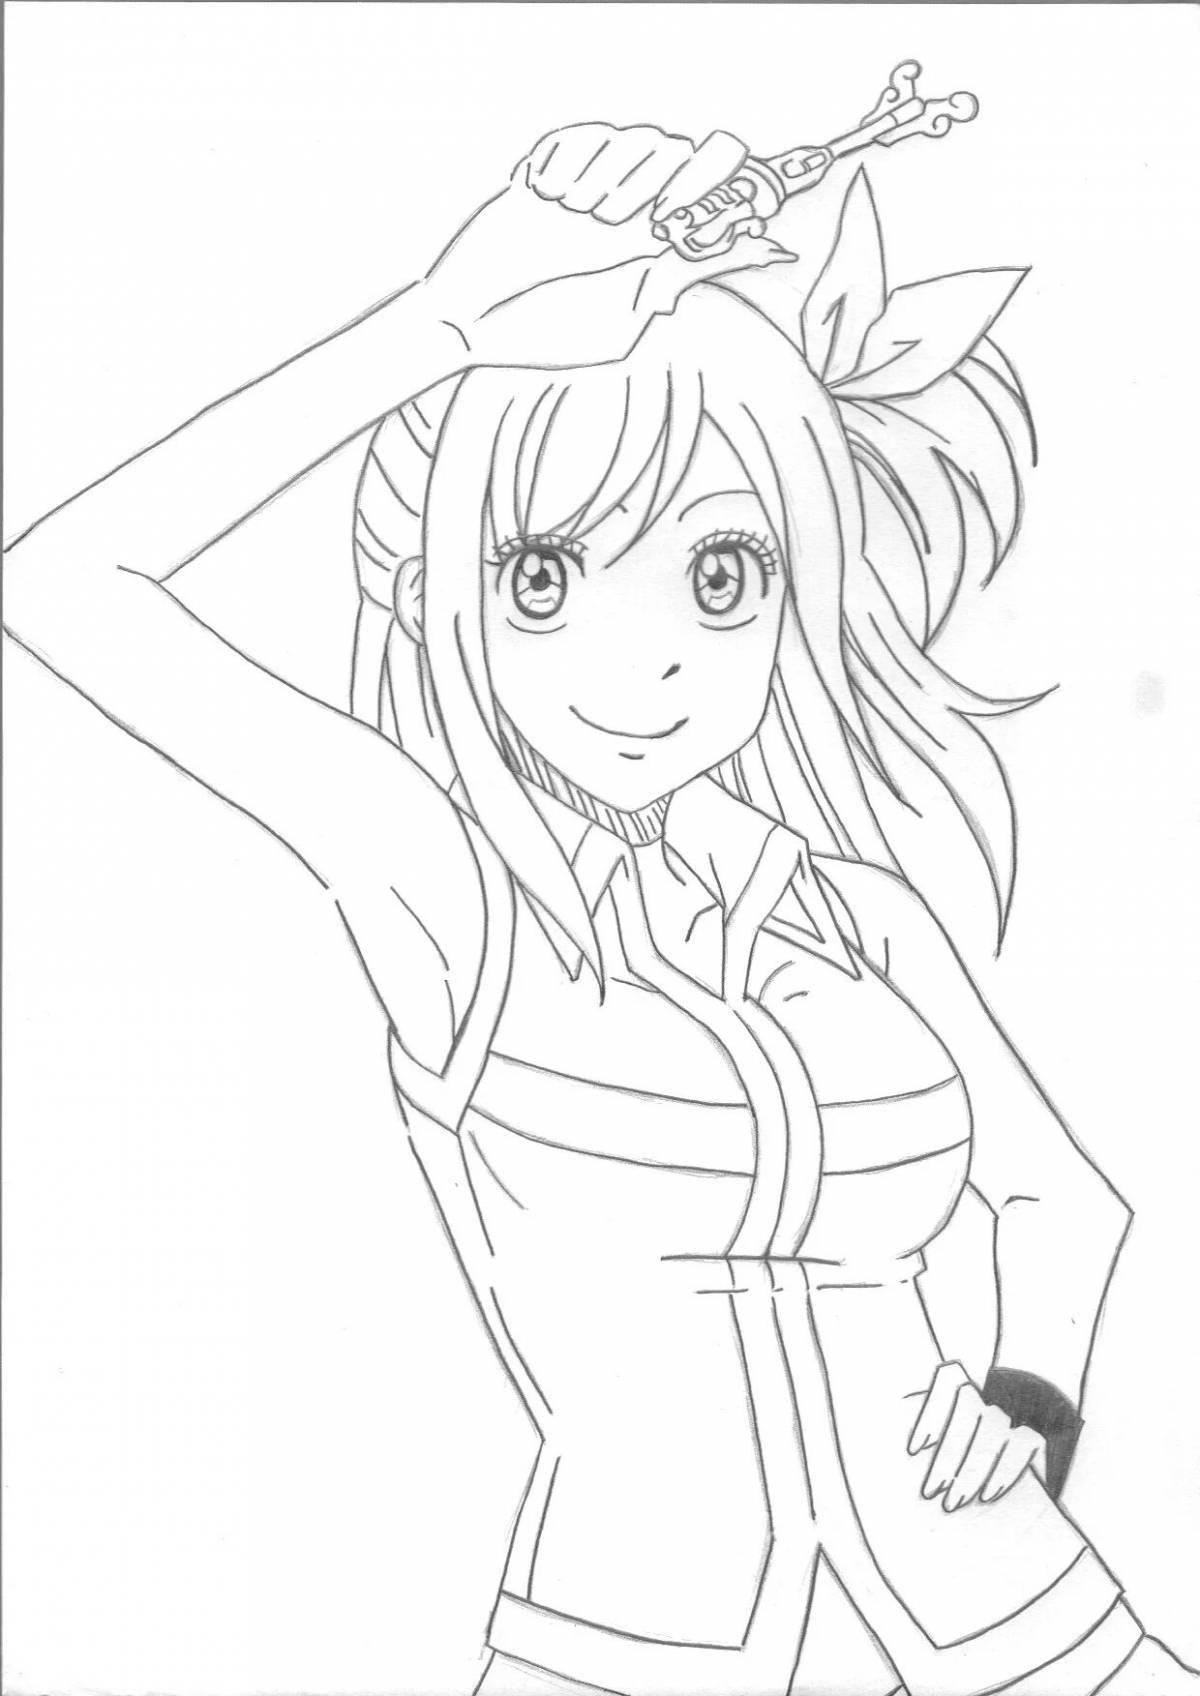 Lucy colorful coloring page